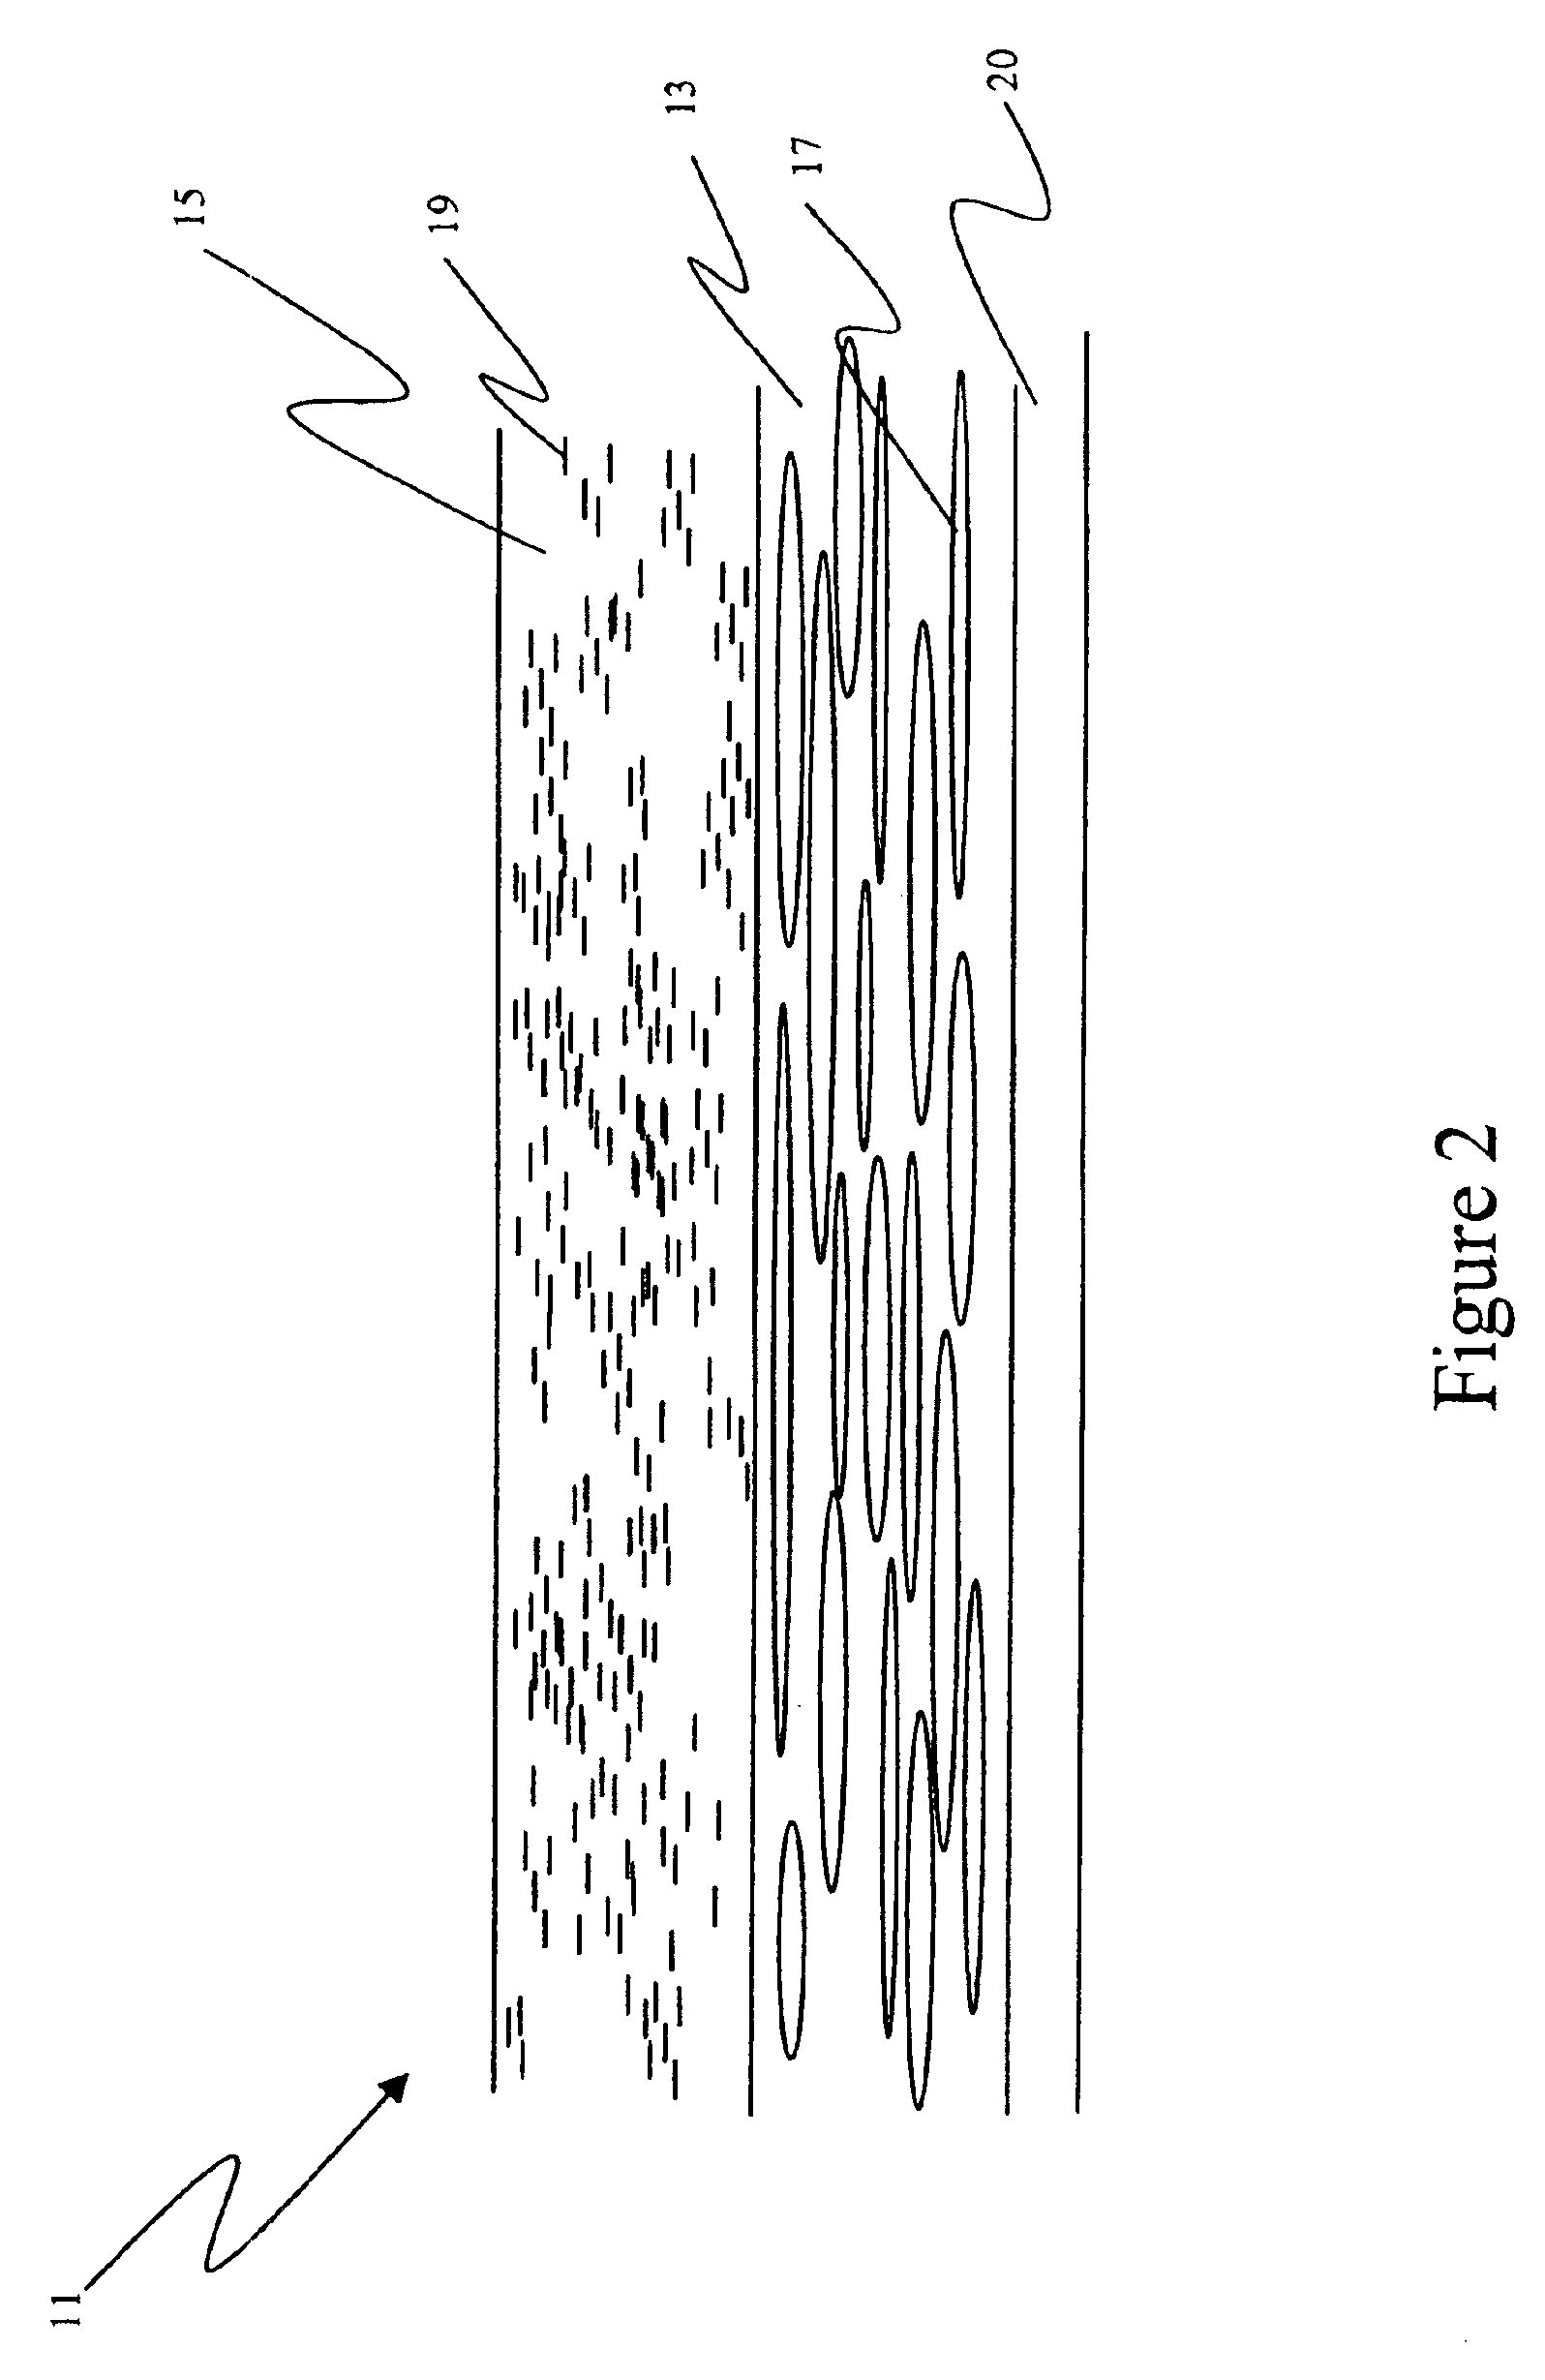 Voided polymer film containing layered particulates